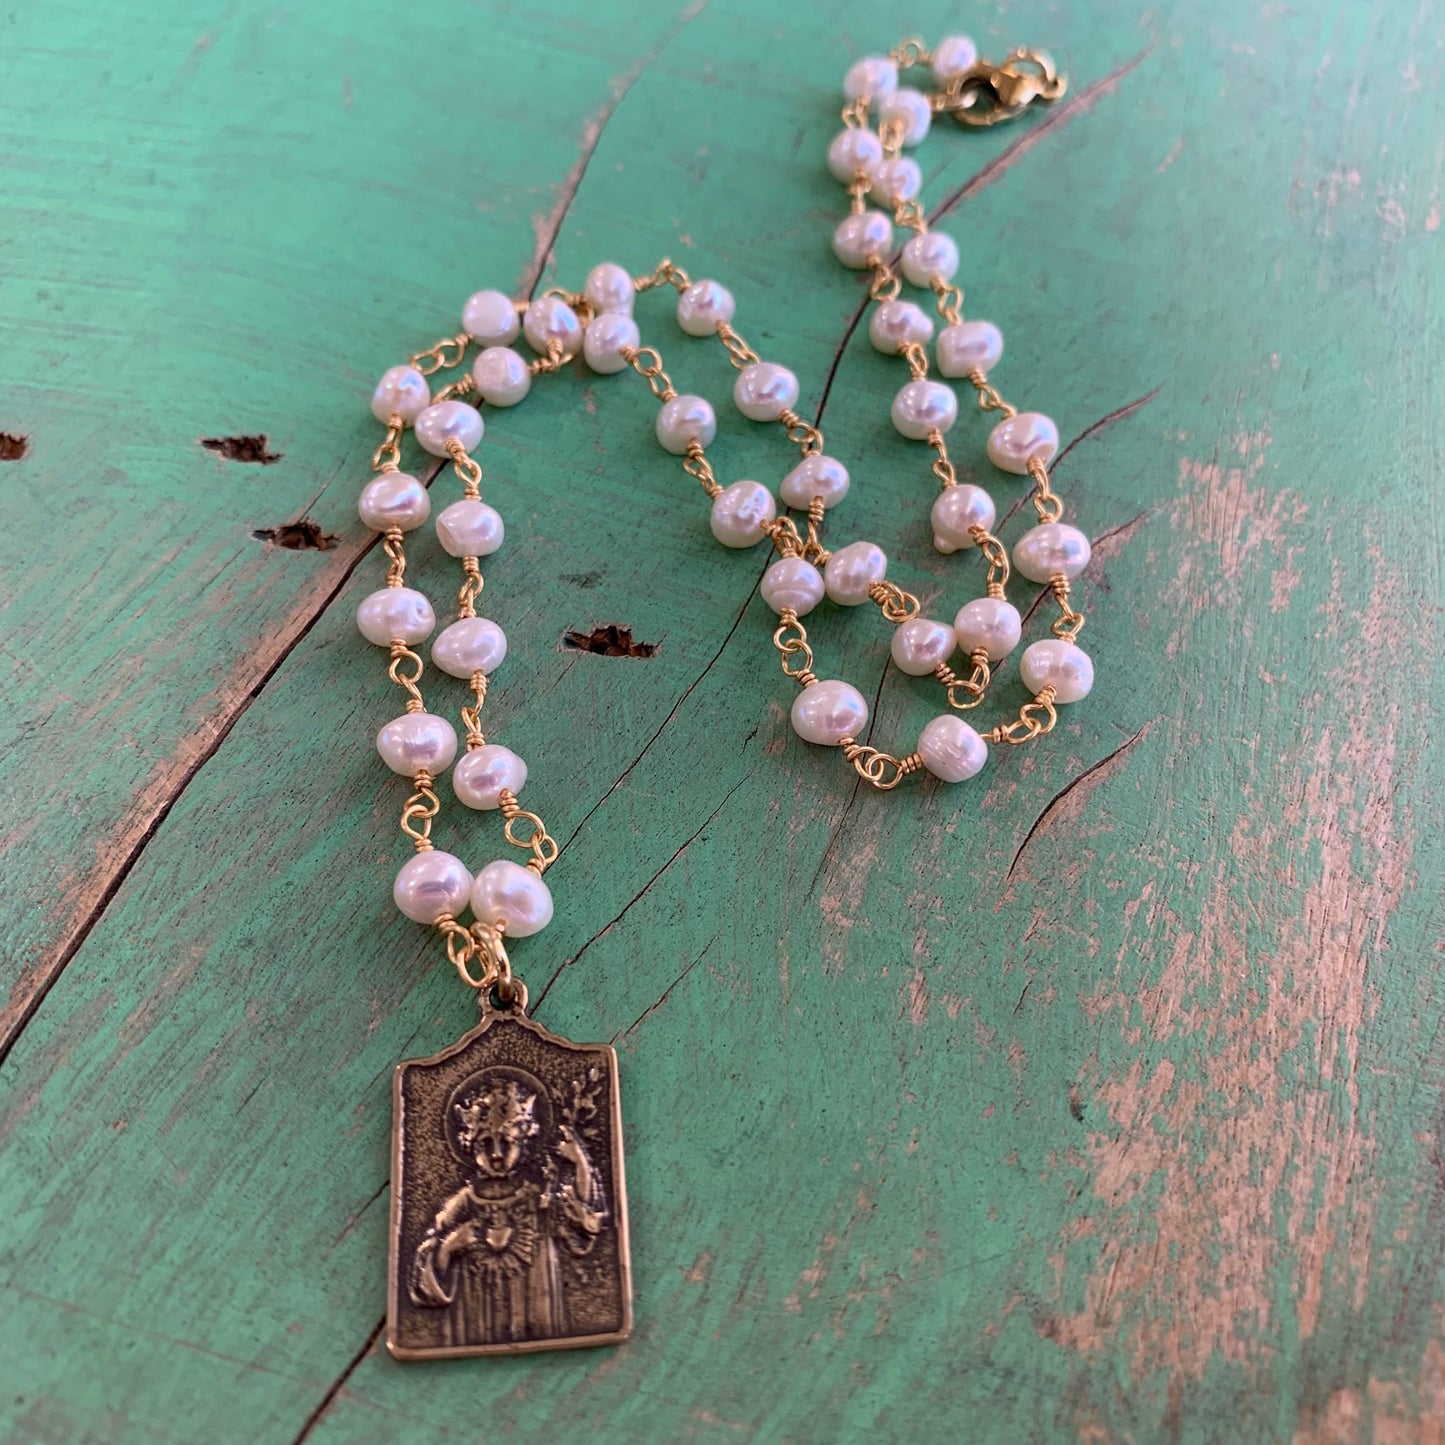 Pearls and Prayers Necklace